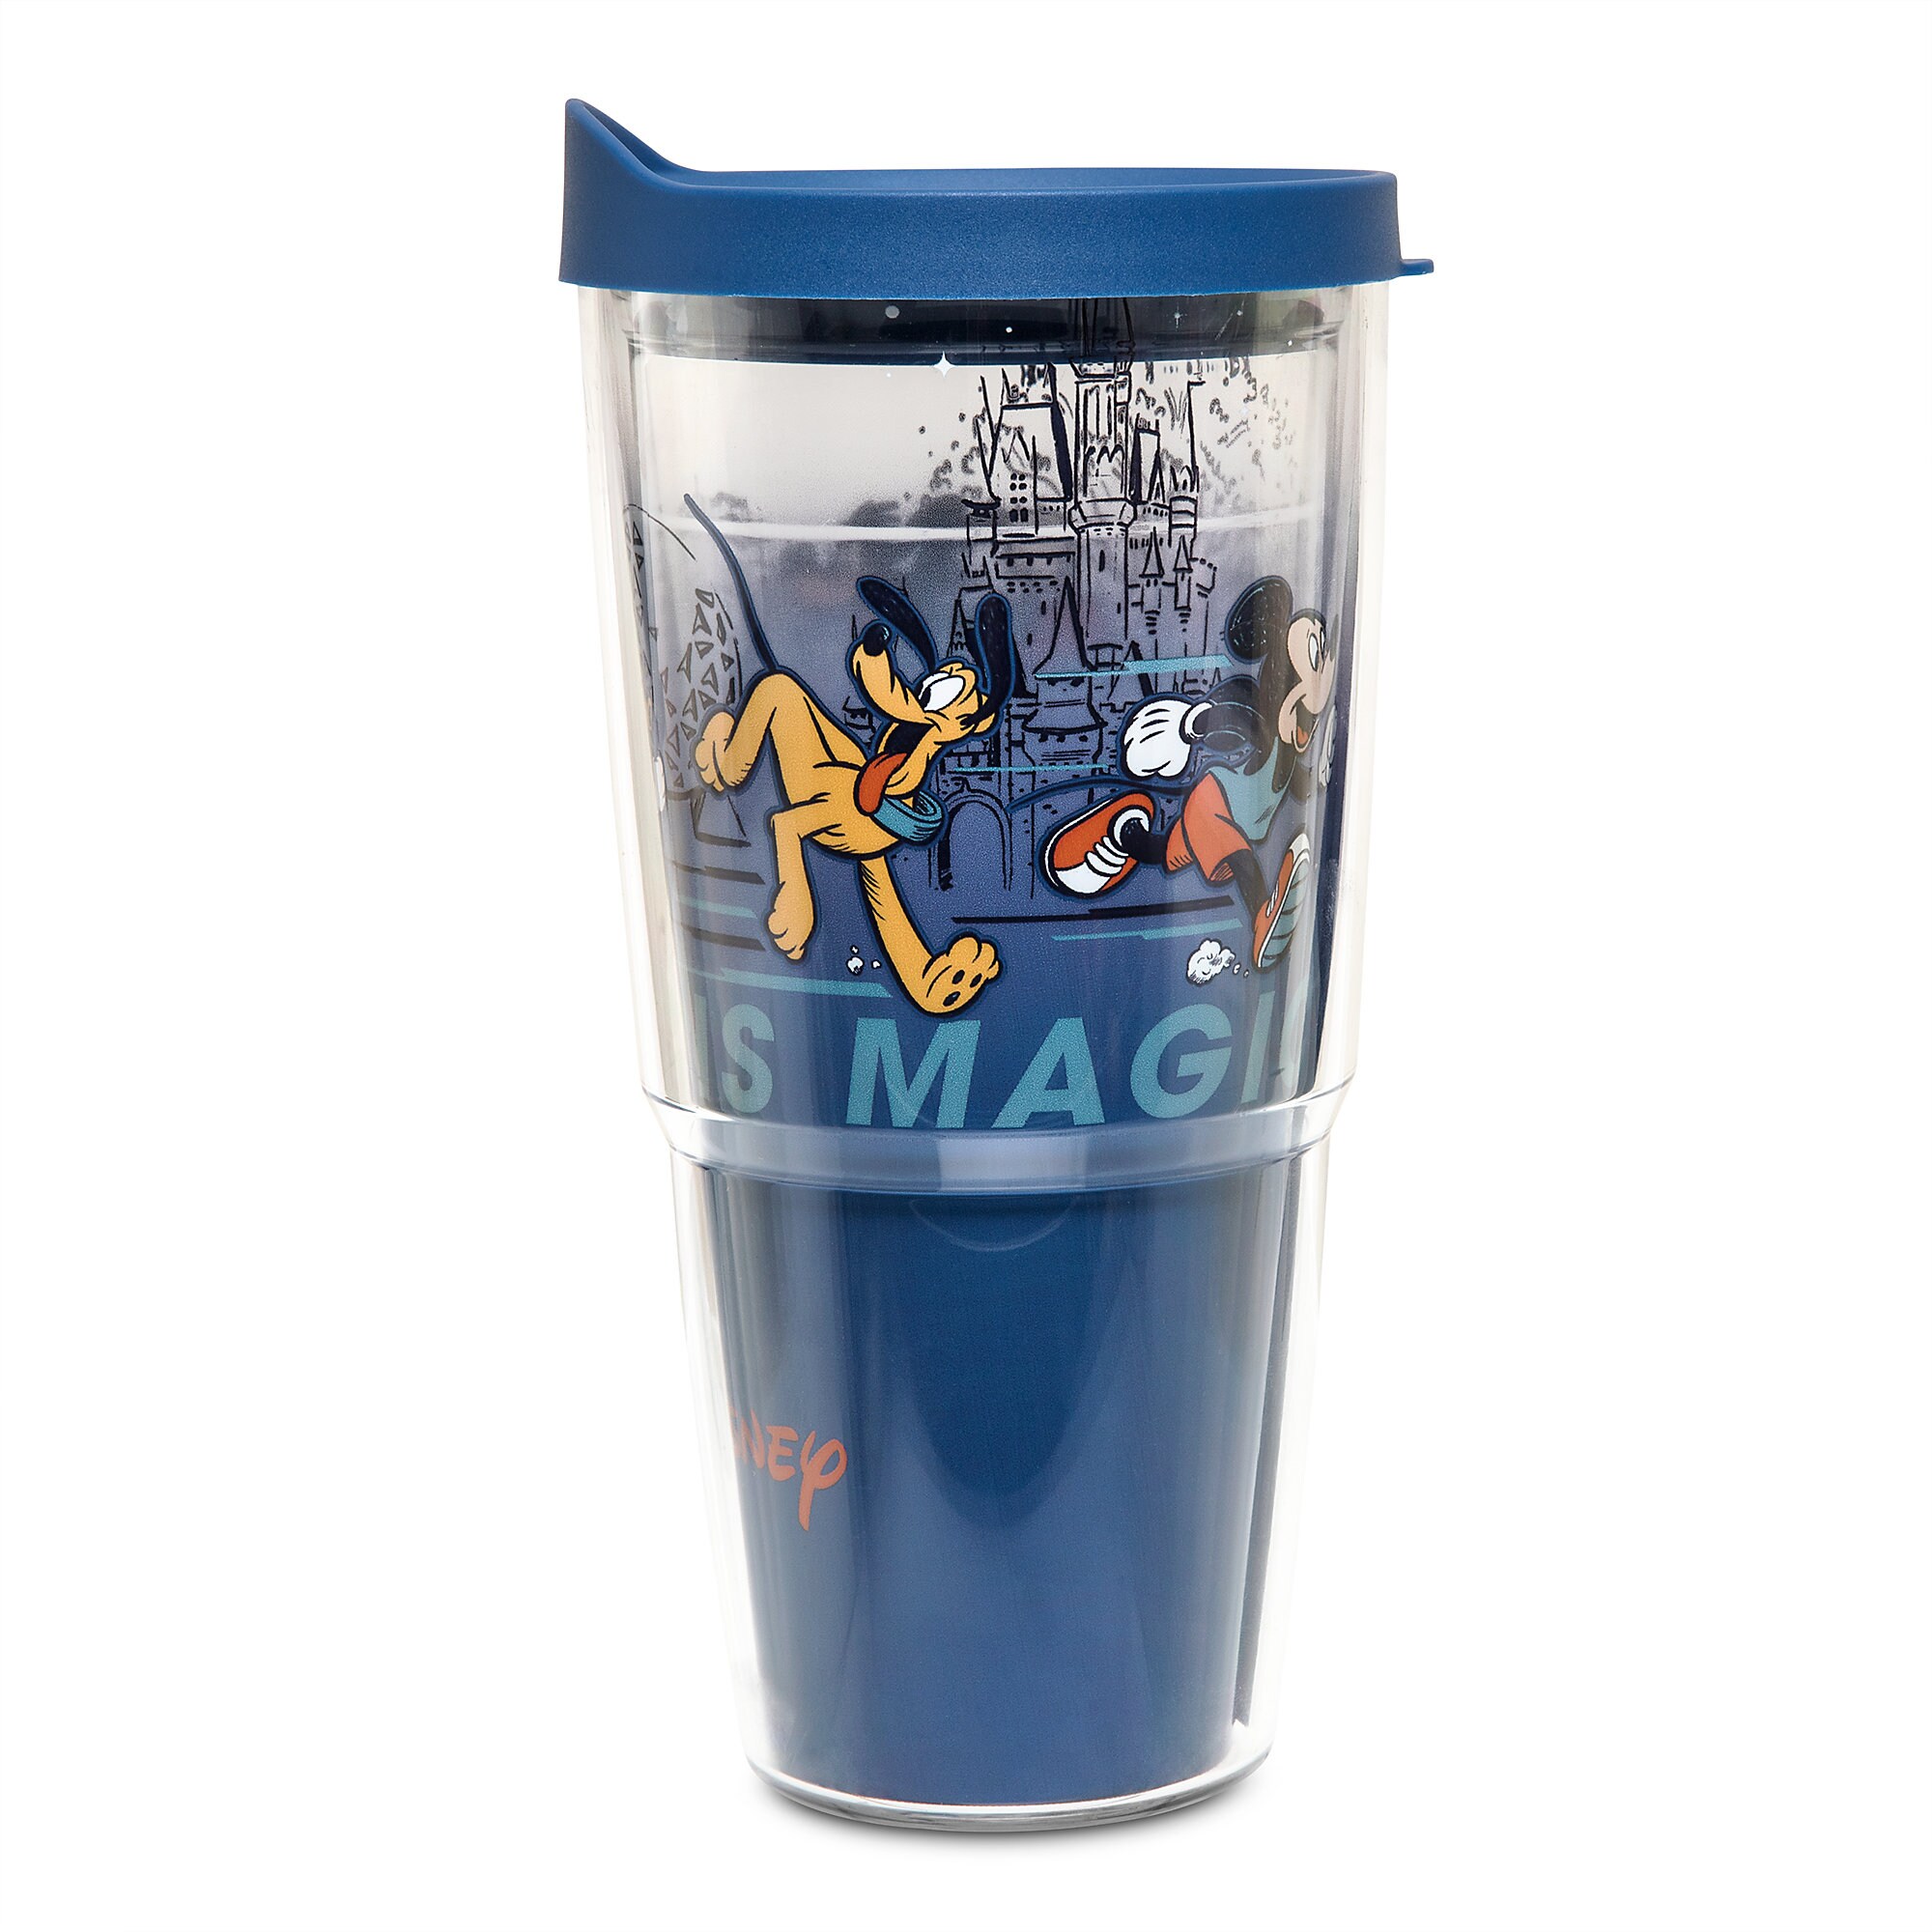 Mickey Mouse and Friends runDisney Travel Tumbler by Tervis - 2019